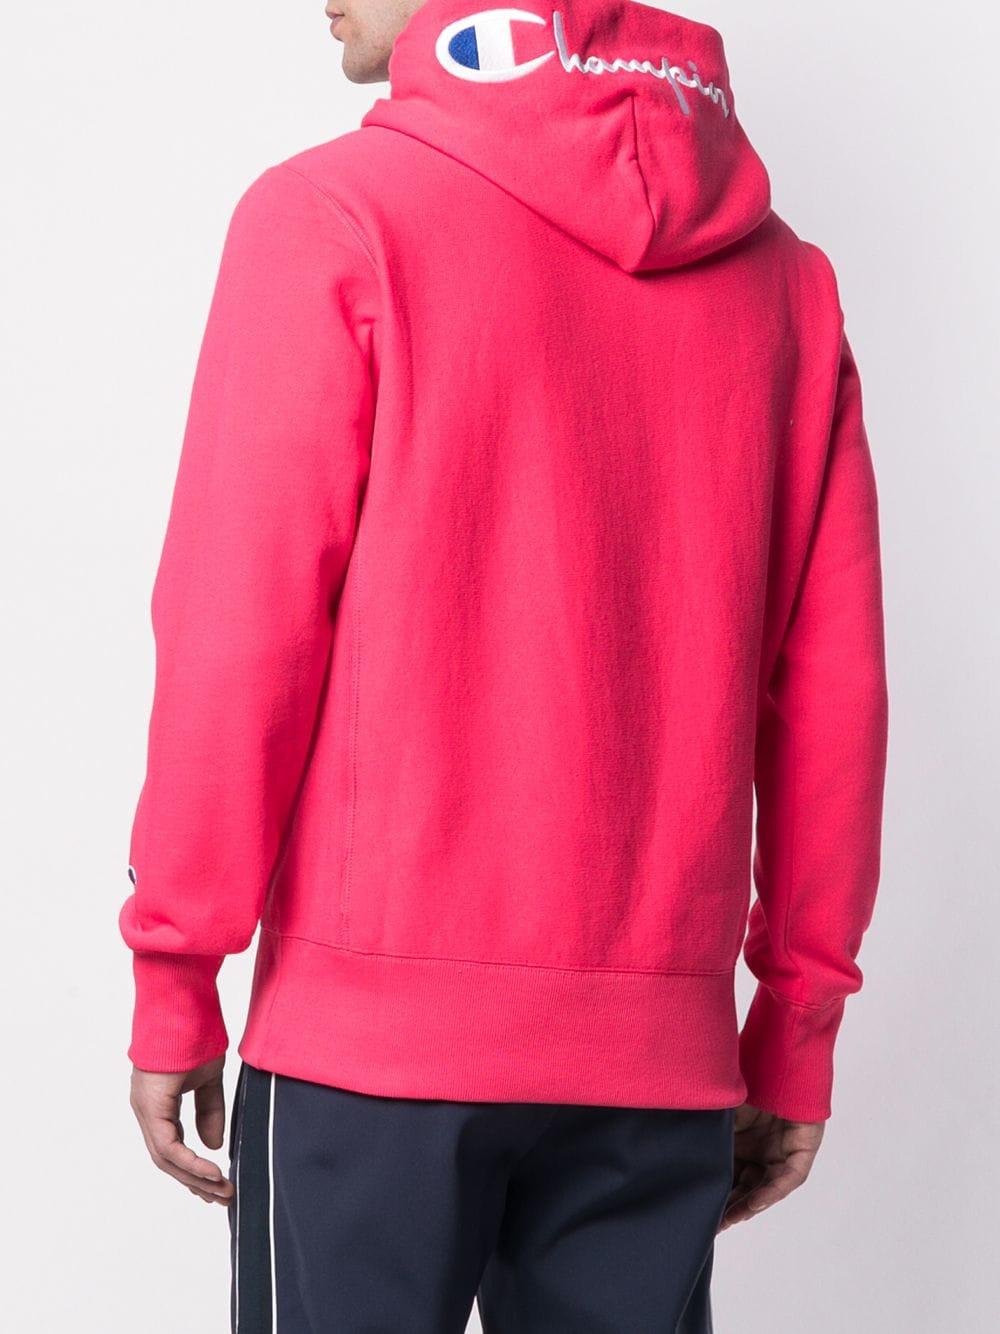 Champion Cotton Embroidered Logo Hoodie in Pink for Men - Lyst